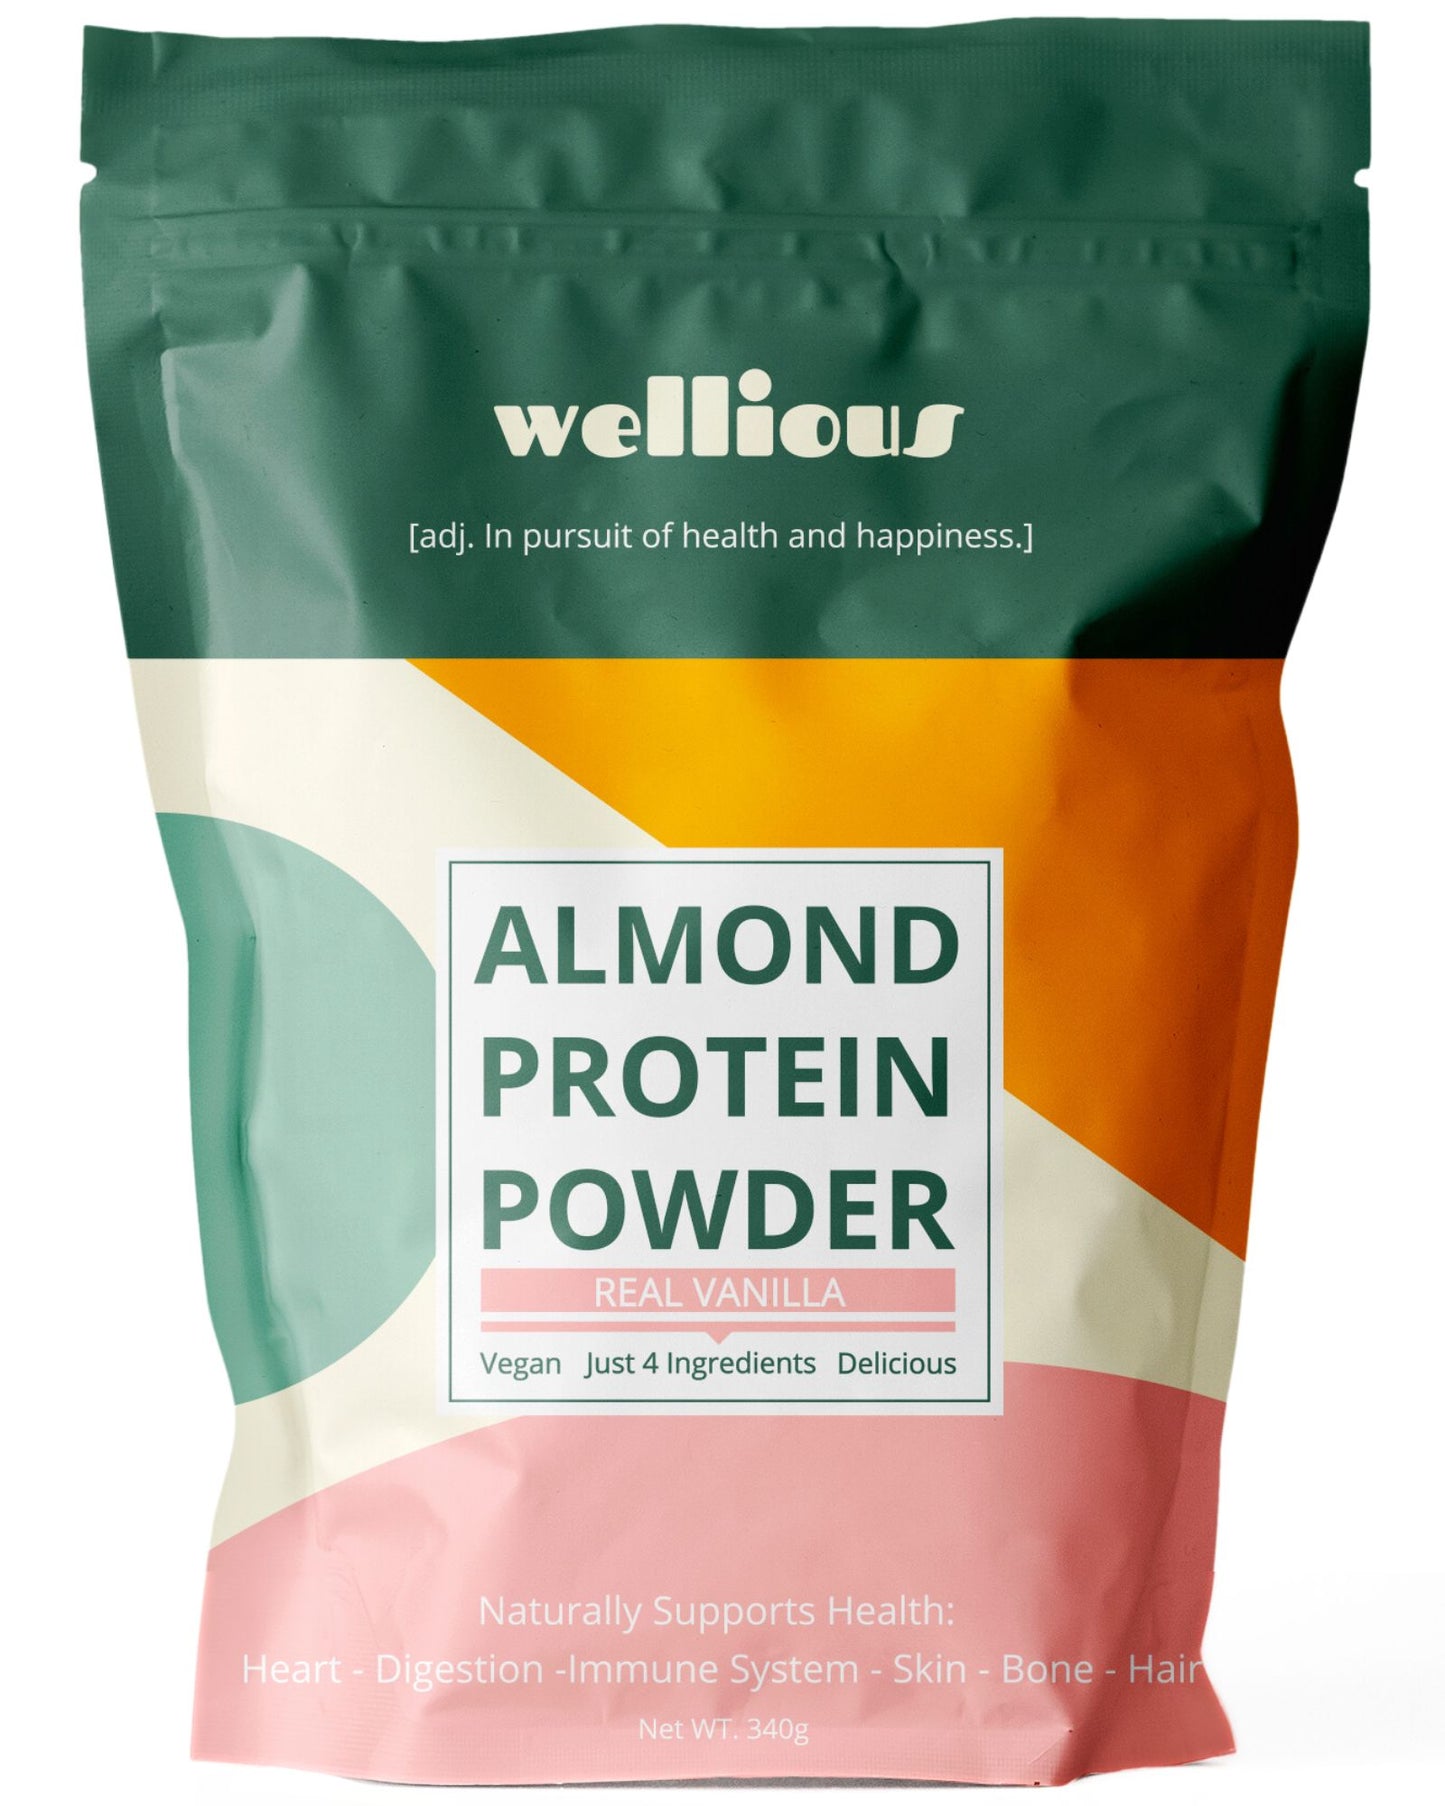 Wellious Protein Powder - Real Vanilla - Vegan, Plant-Based, Clean Label, Keto, Dairy-Free, Natural Dietary Supplement For Health and Fitness